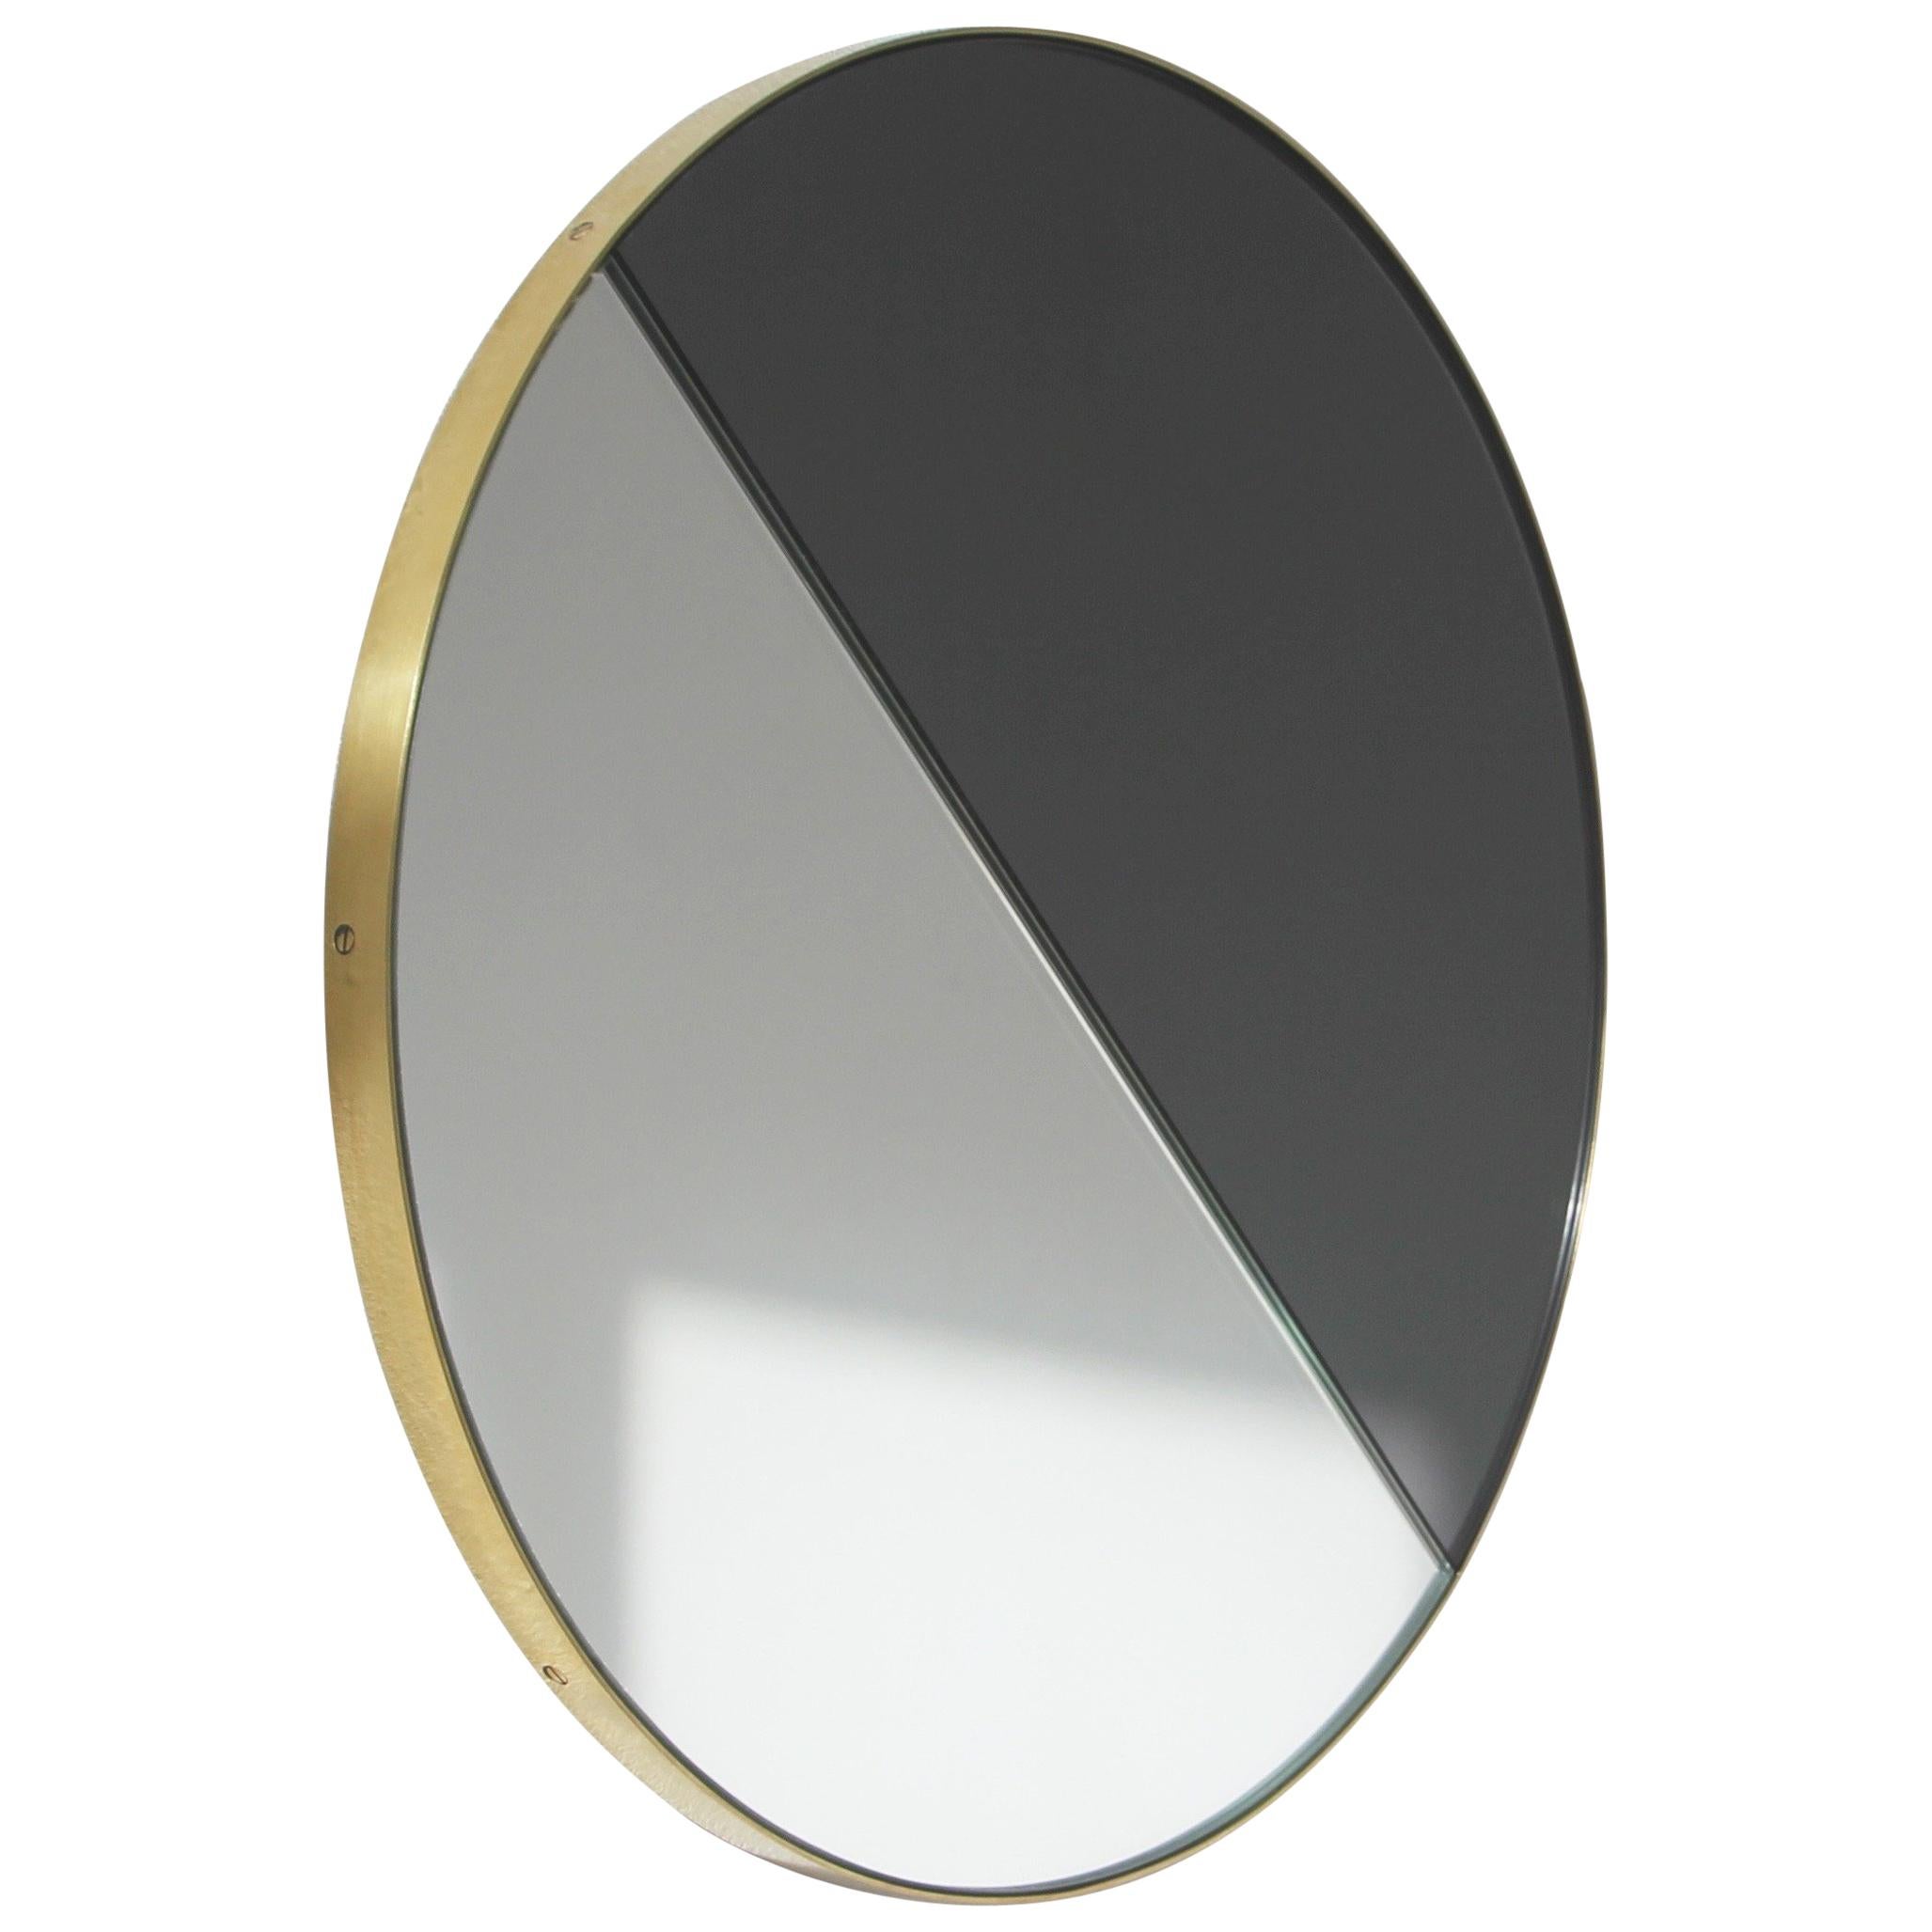 Orbis Dualis Mixed Tint Contemporary Round Mirror with Brass Frame, Large